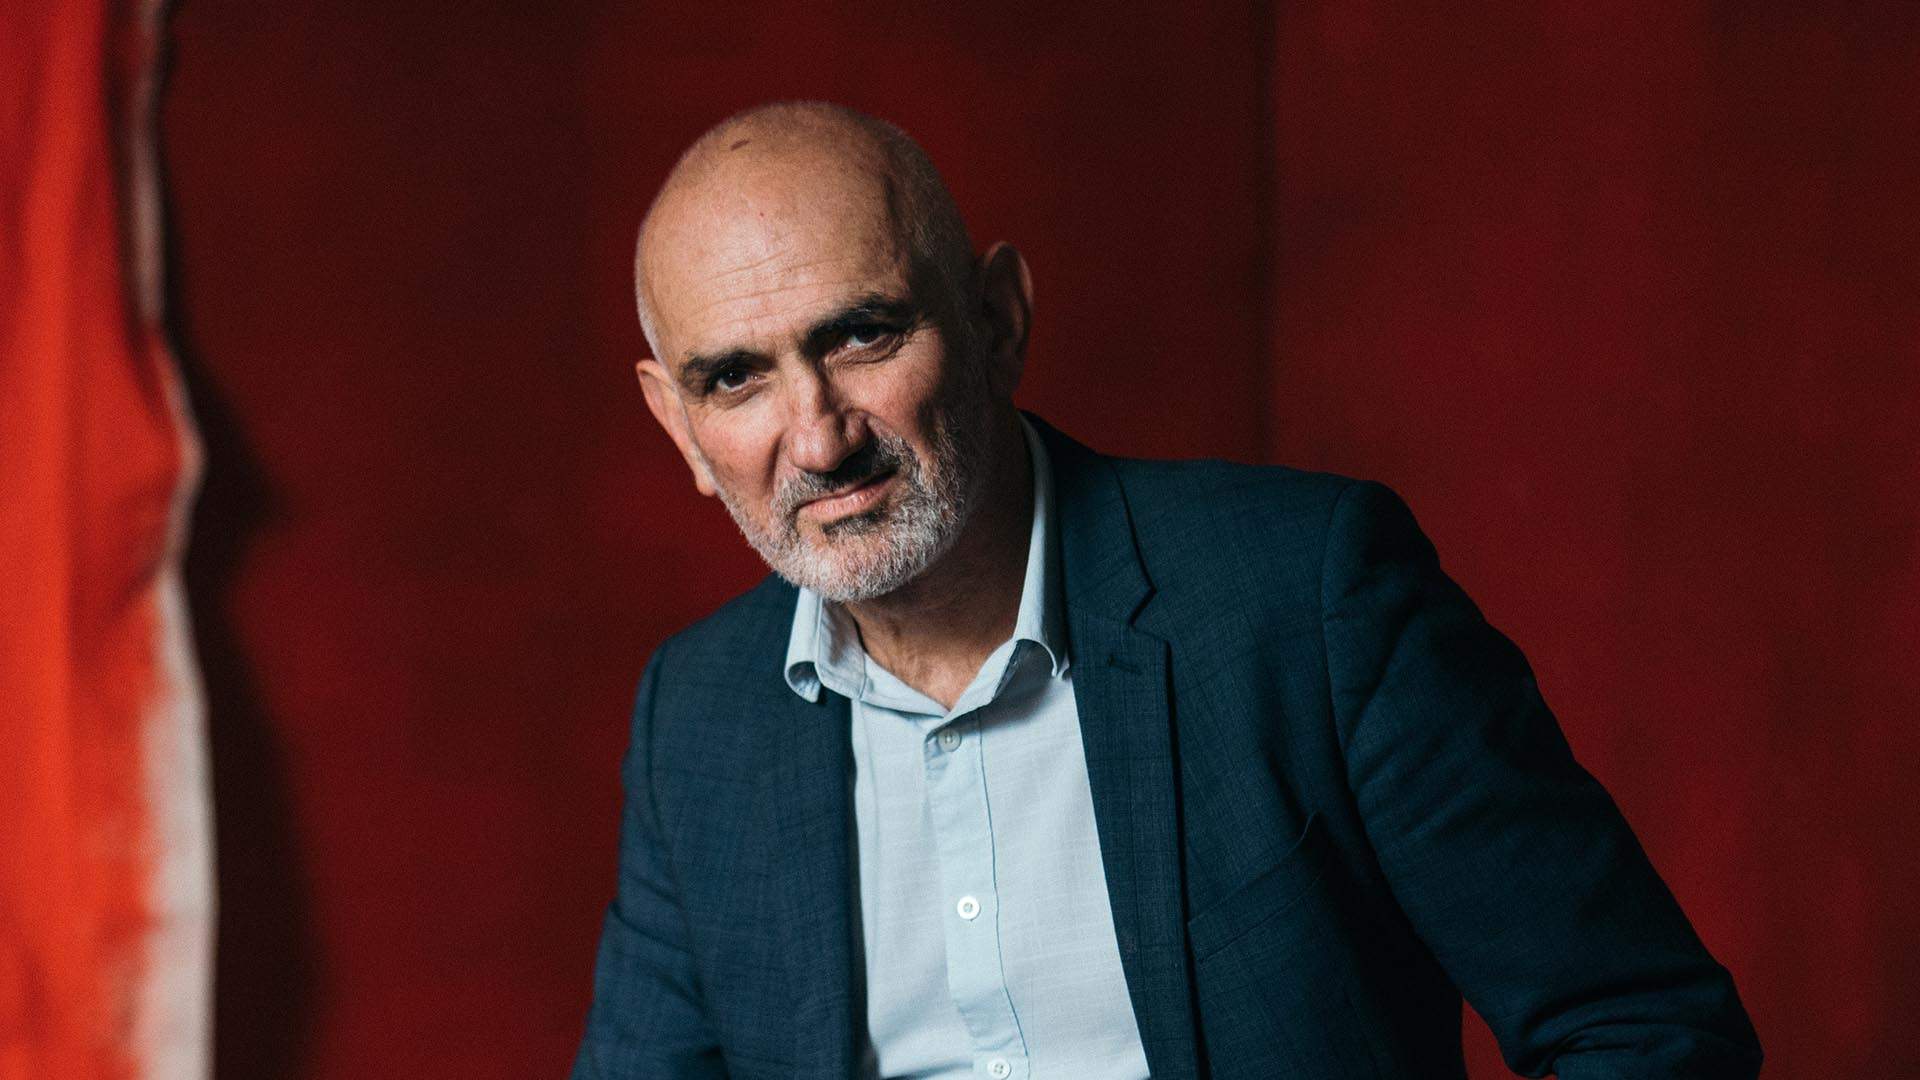 Paul Kelly's Beloved 'How to Make Gravy' Is Being Turned Into an Aussie Christmas Film